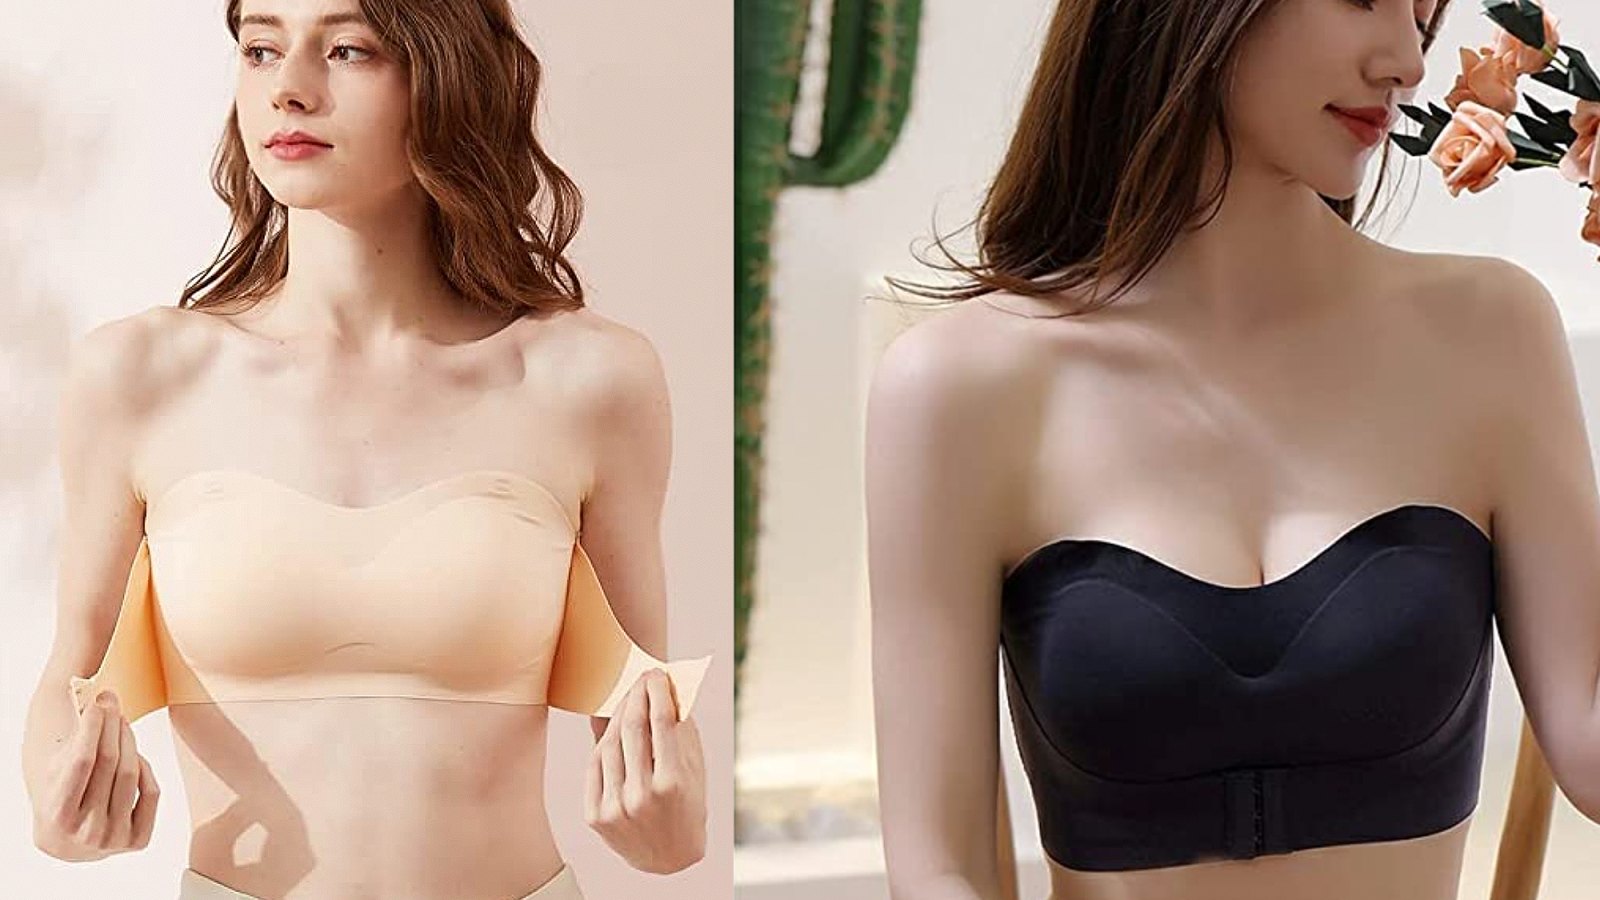 Stickies for Strapless Front Buckle Lift Bra Wire Slip Push Up